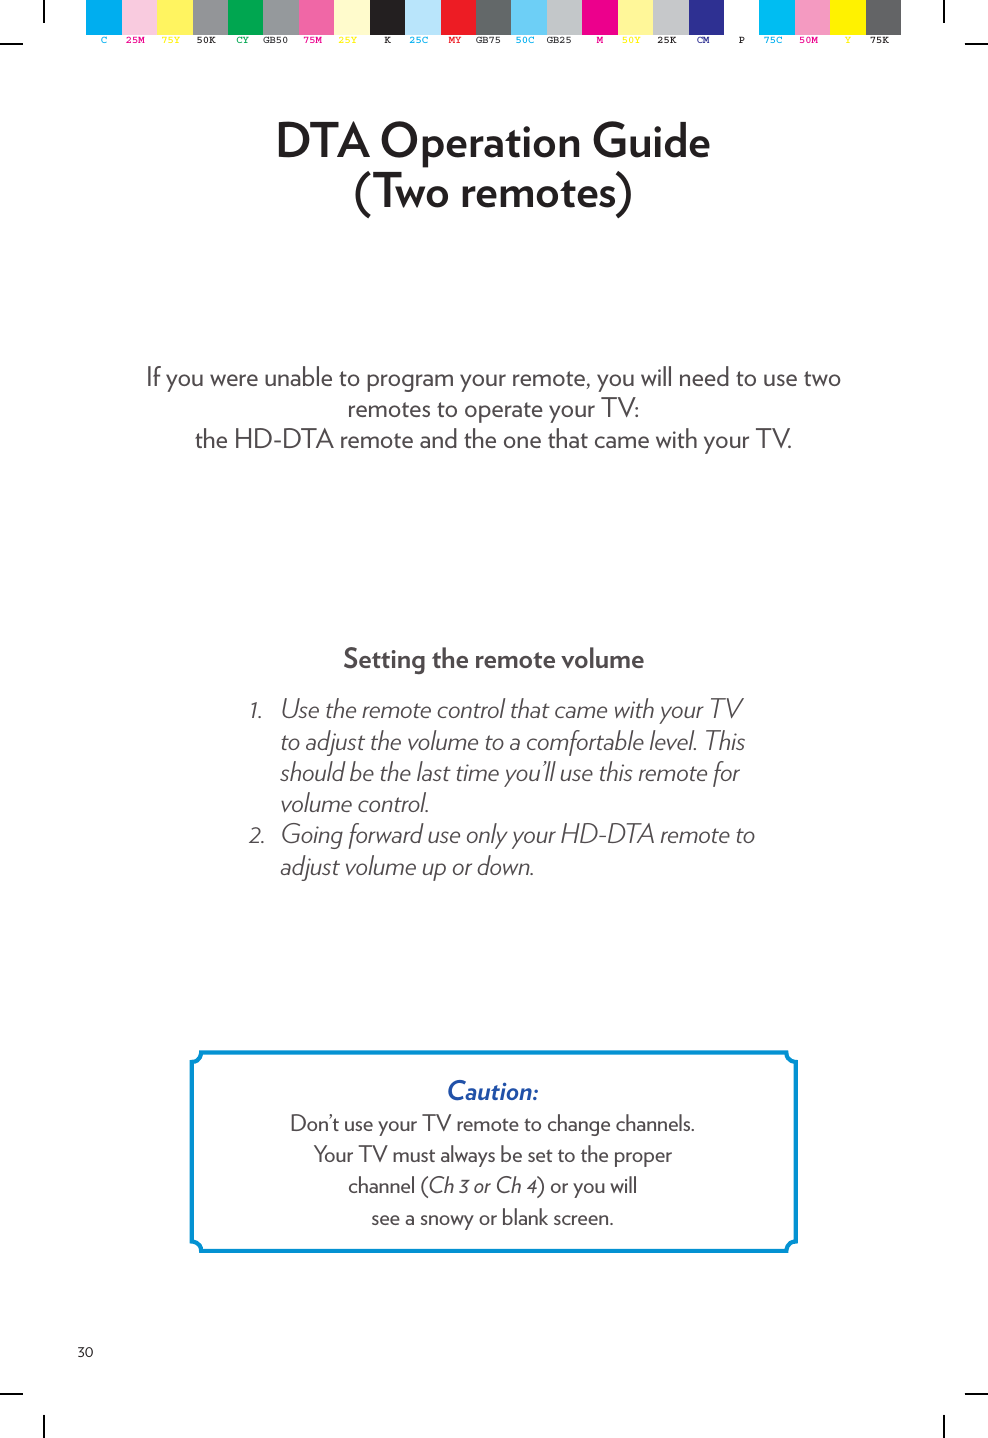 30DTA Operation Guide (Two remotes)If you were unable to program your remote, you will need to use two remotes to operate your TV:  the HD-DTA remote and the one that came with your TV.Setting the remote volume1. UsetheremotecontrolthatcamewithyourTVtoadjustthevolumetoacomfortablelevel.Thisshouldbethelasttimeyou’llusethisremoteforvolumecontrol.2. GoingforwarduseonlyyourHD-DTAremotetoadjustvolumeupordown.Caution:  Don’t use your TV remote to change channels.Your TV must always be set to the proper  channel (Ch 3 or Ch 4) or you will  see a snowy or blank screen.C25M 75Y 50K CY GB50 75M 25Y K25C MY GB75 50C GB25 M50Y 25K CM P75C 50M Y75K